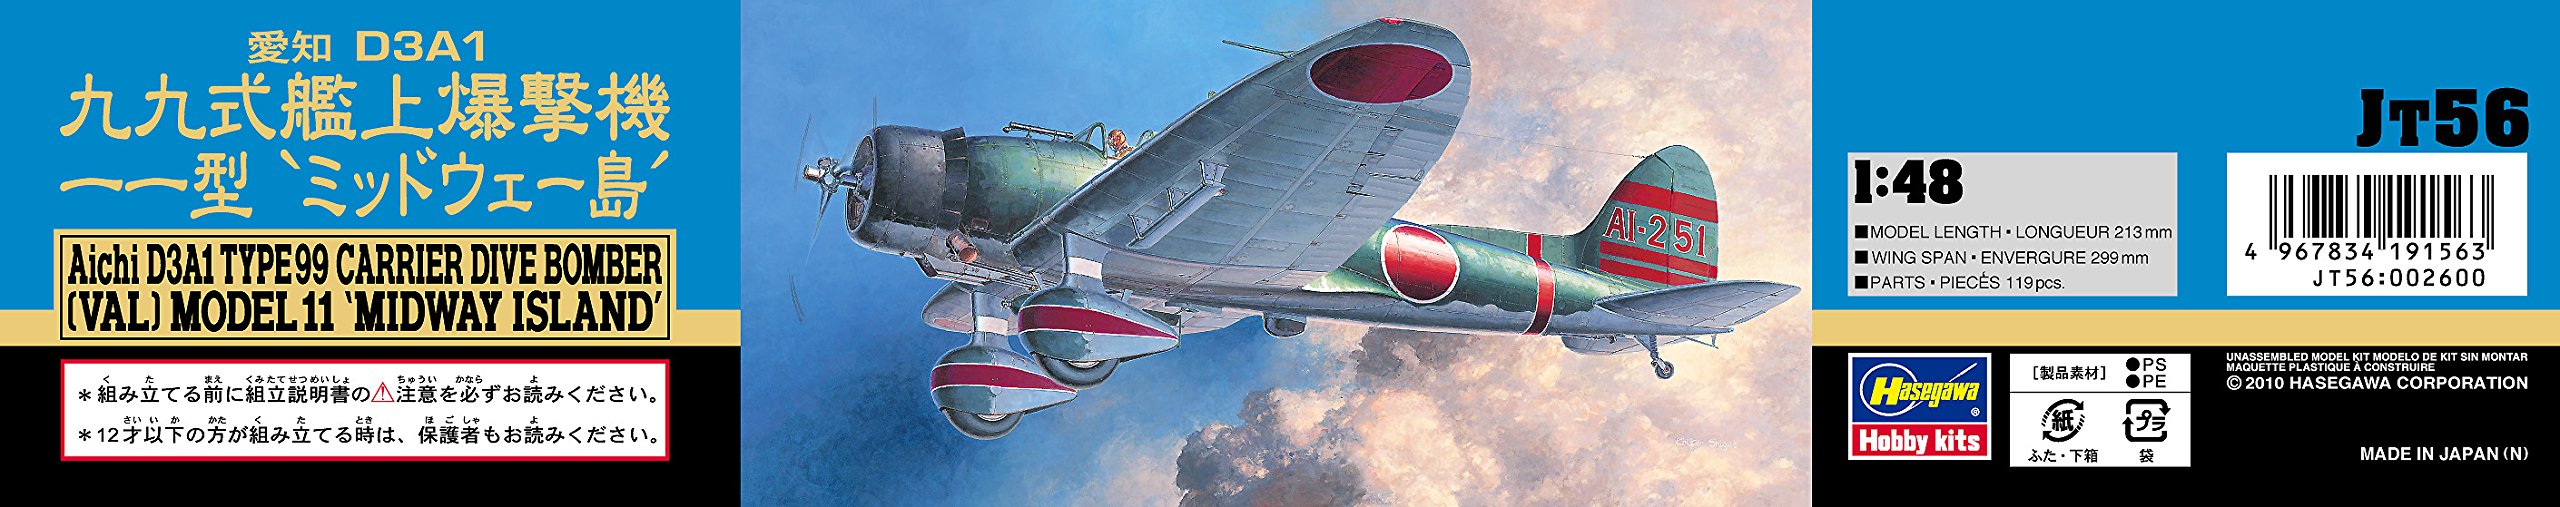 HASEGAWA 1/48 Aichi D3A1 Type 99 Carrier Dive Bomber Val Model 11 'Midway Island' Plastikmodell